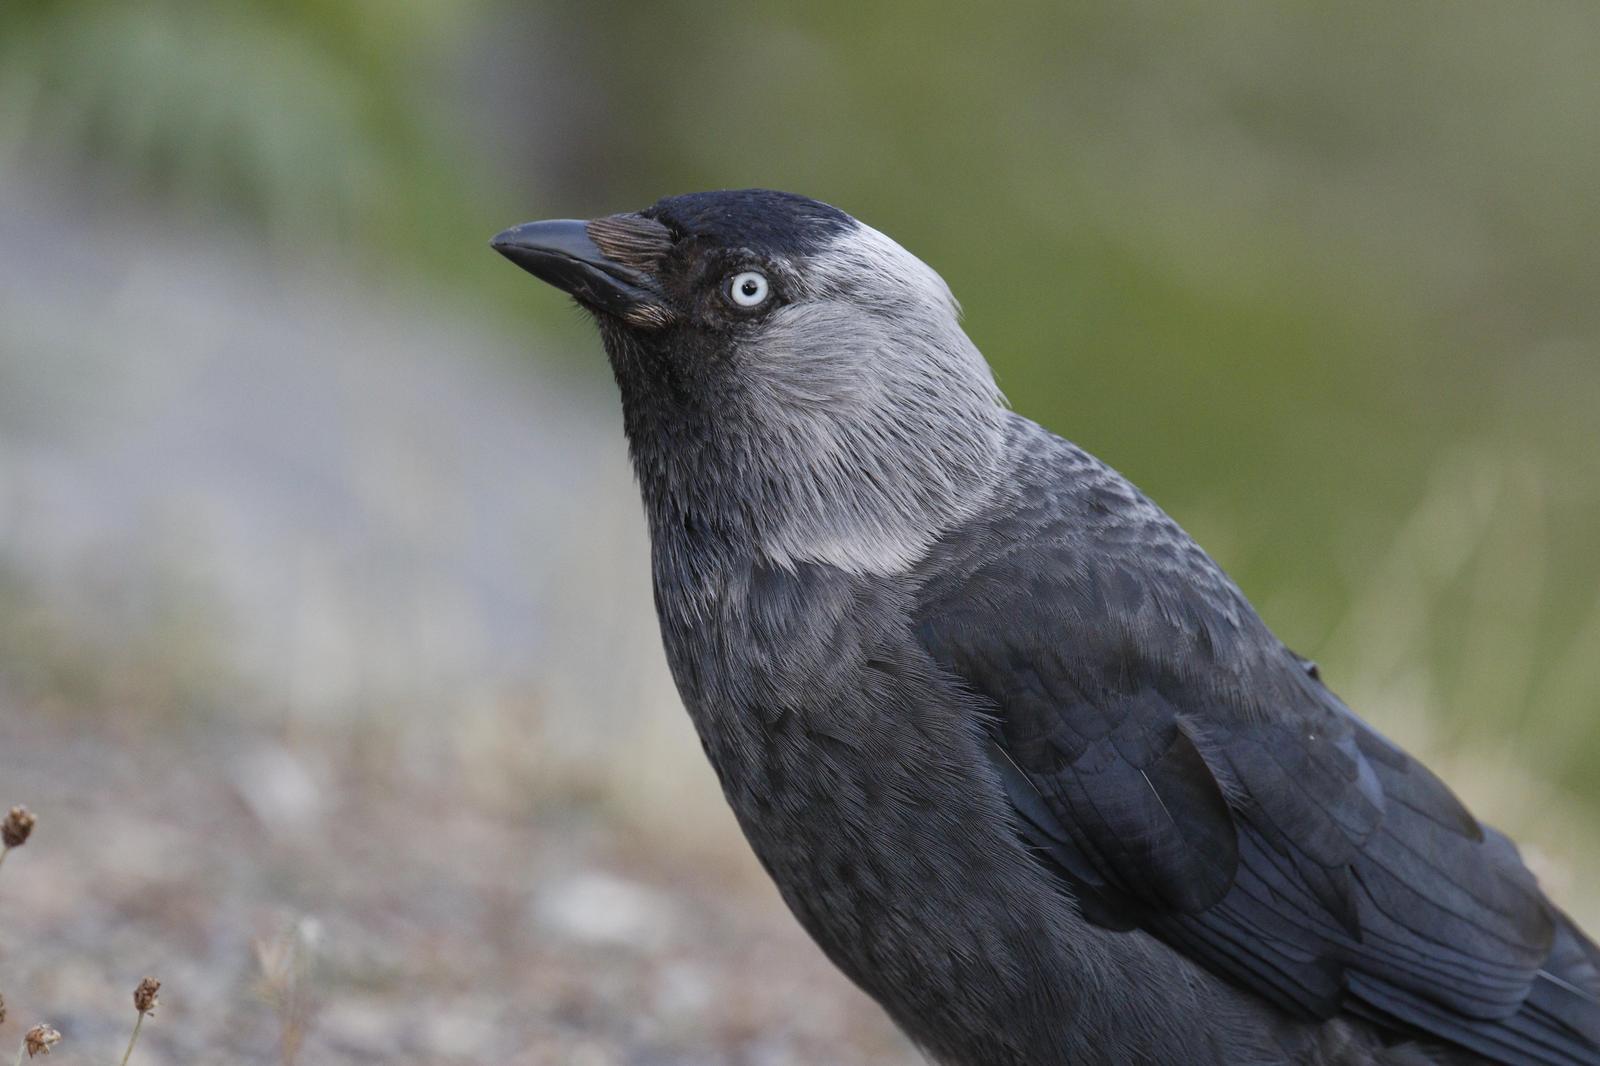 Eurasian Jackdaw Photo by Emily Willoughby